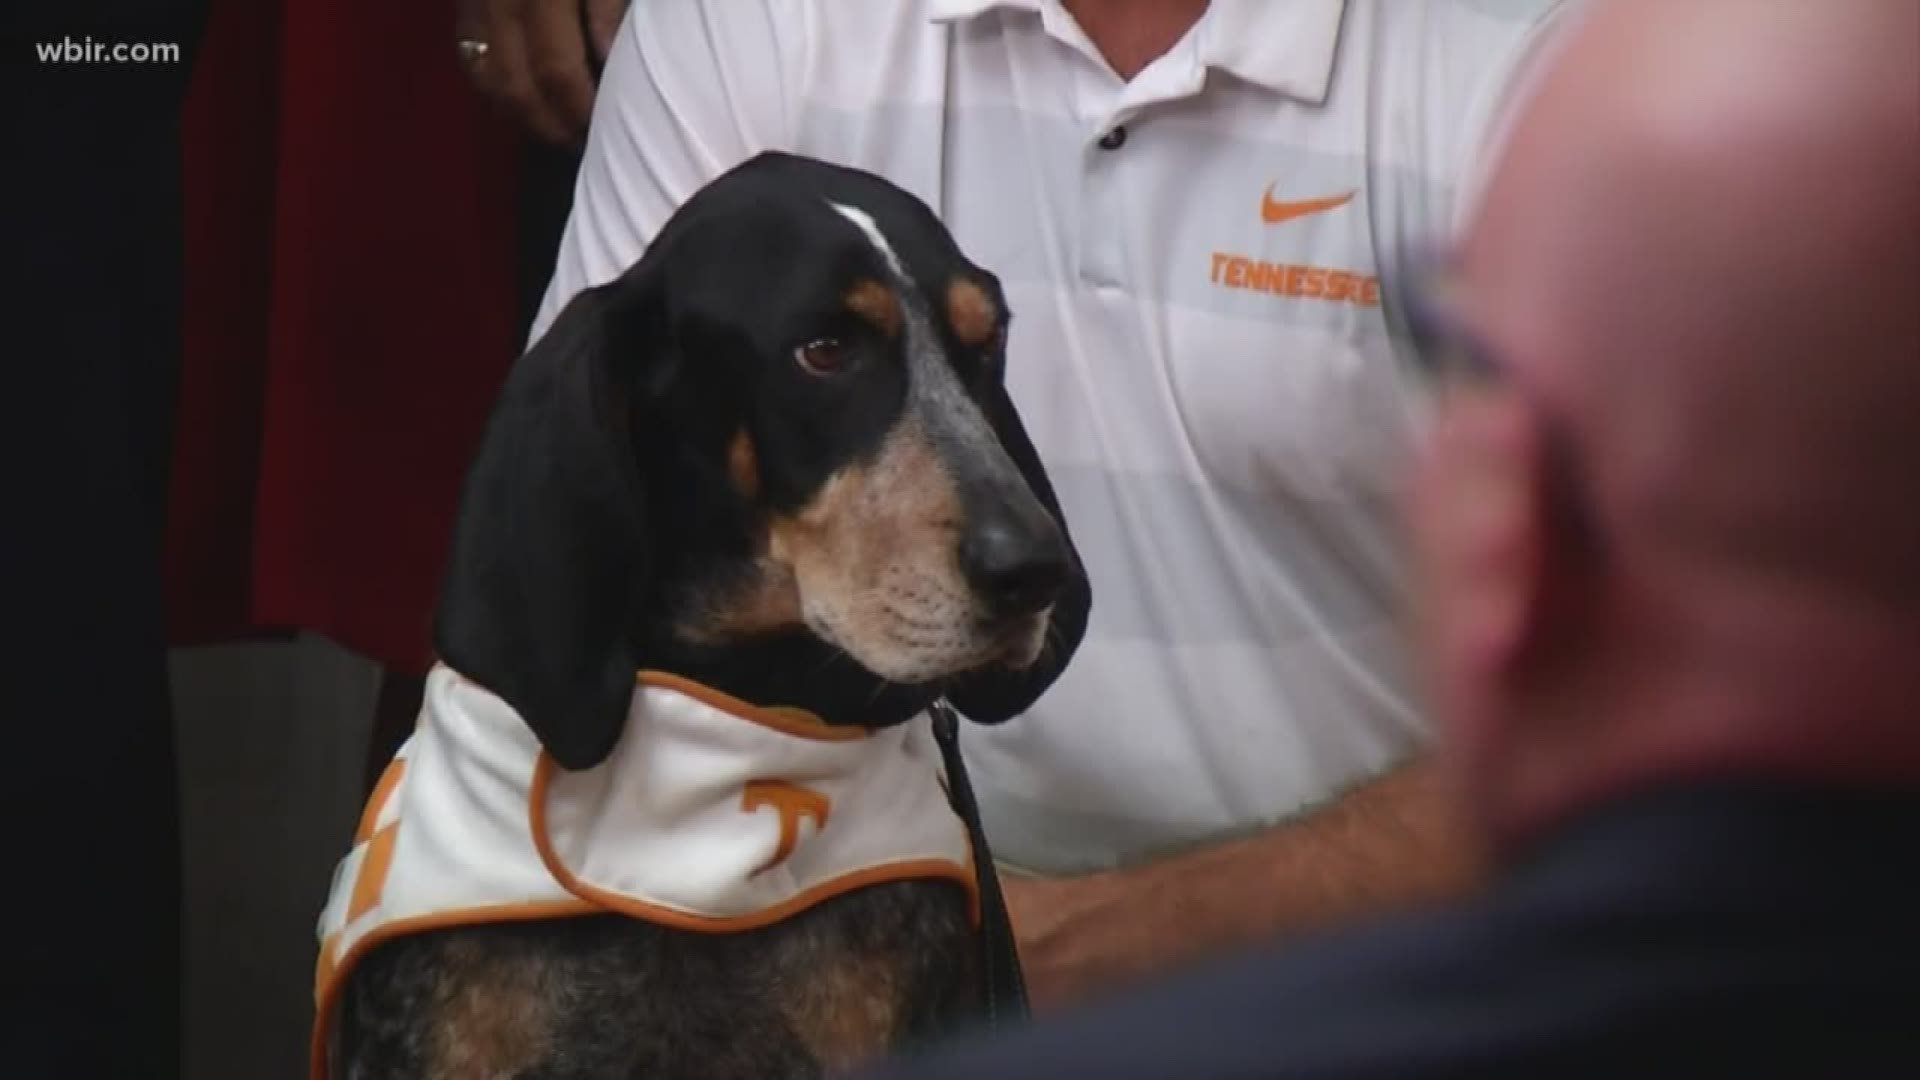 The Governor held a ceremonial signing to pen Smokey and his breed in as Tennessee's state dog.